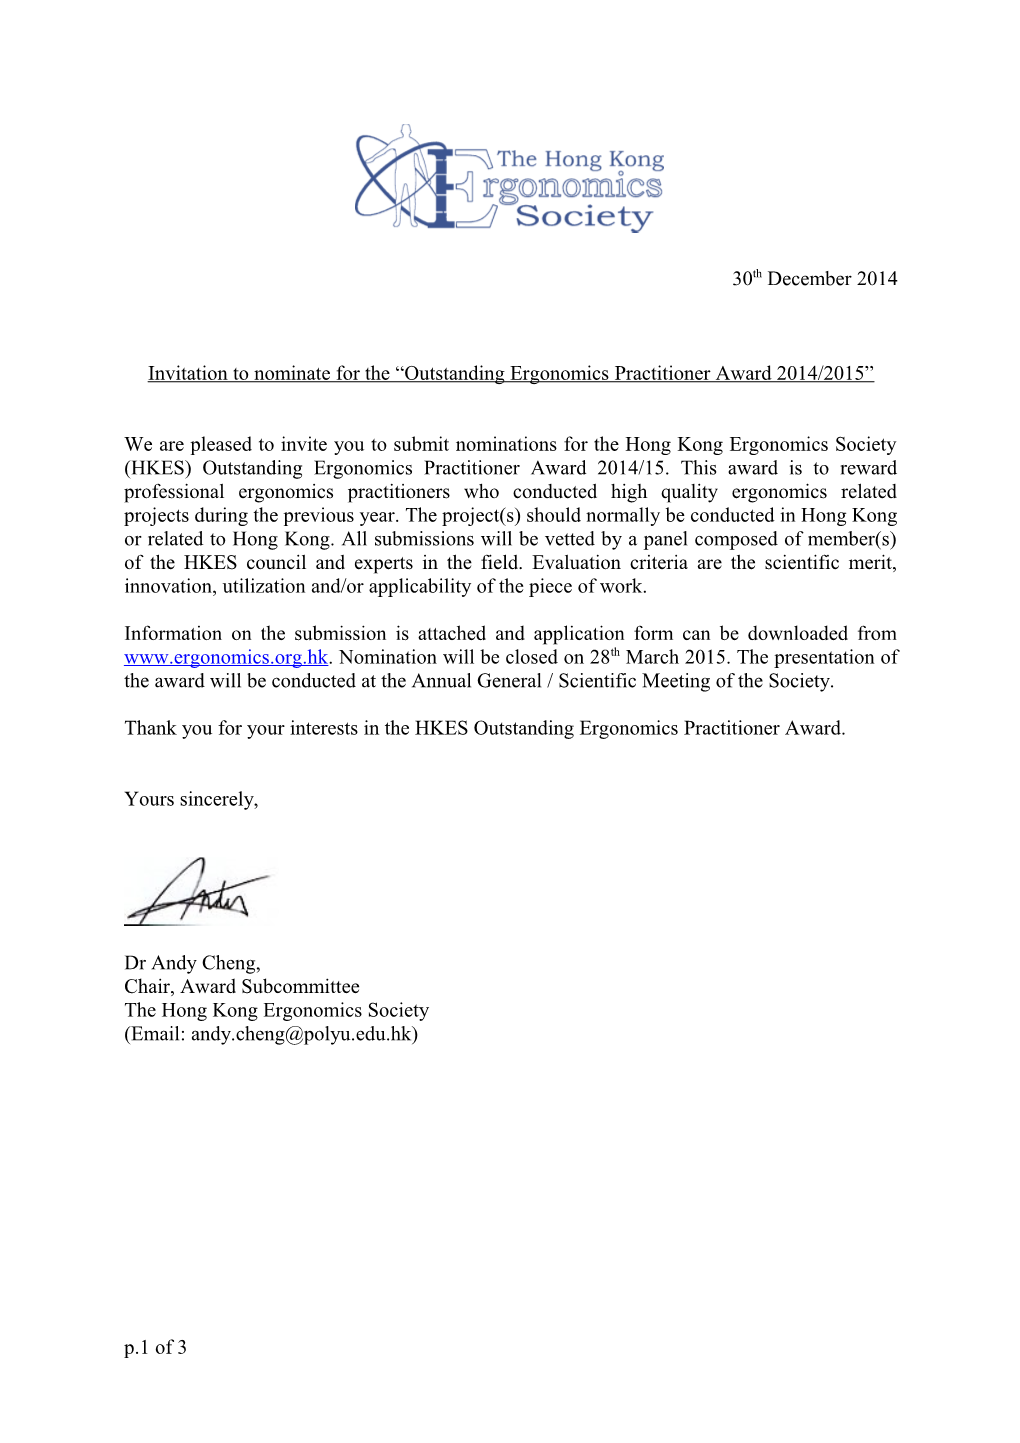 Invitation to Nominate for the Outstanding Ergonomics Practitioner Award 2014/2015